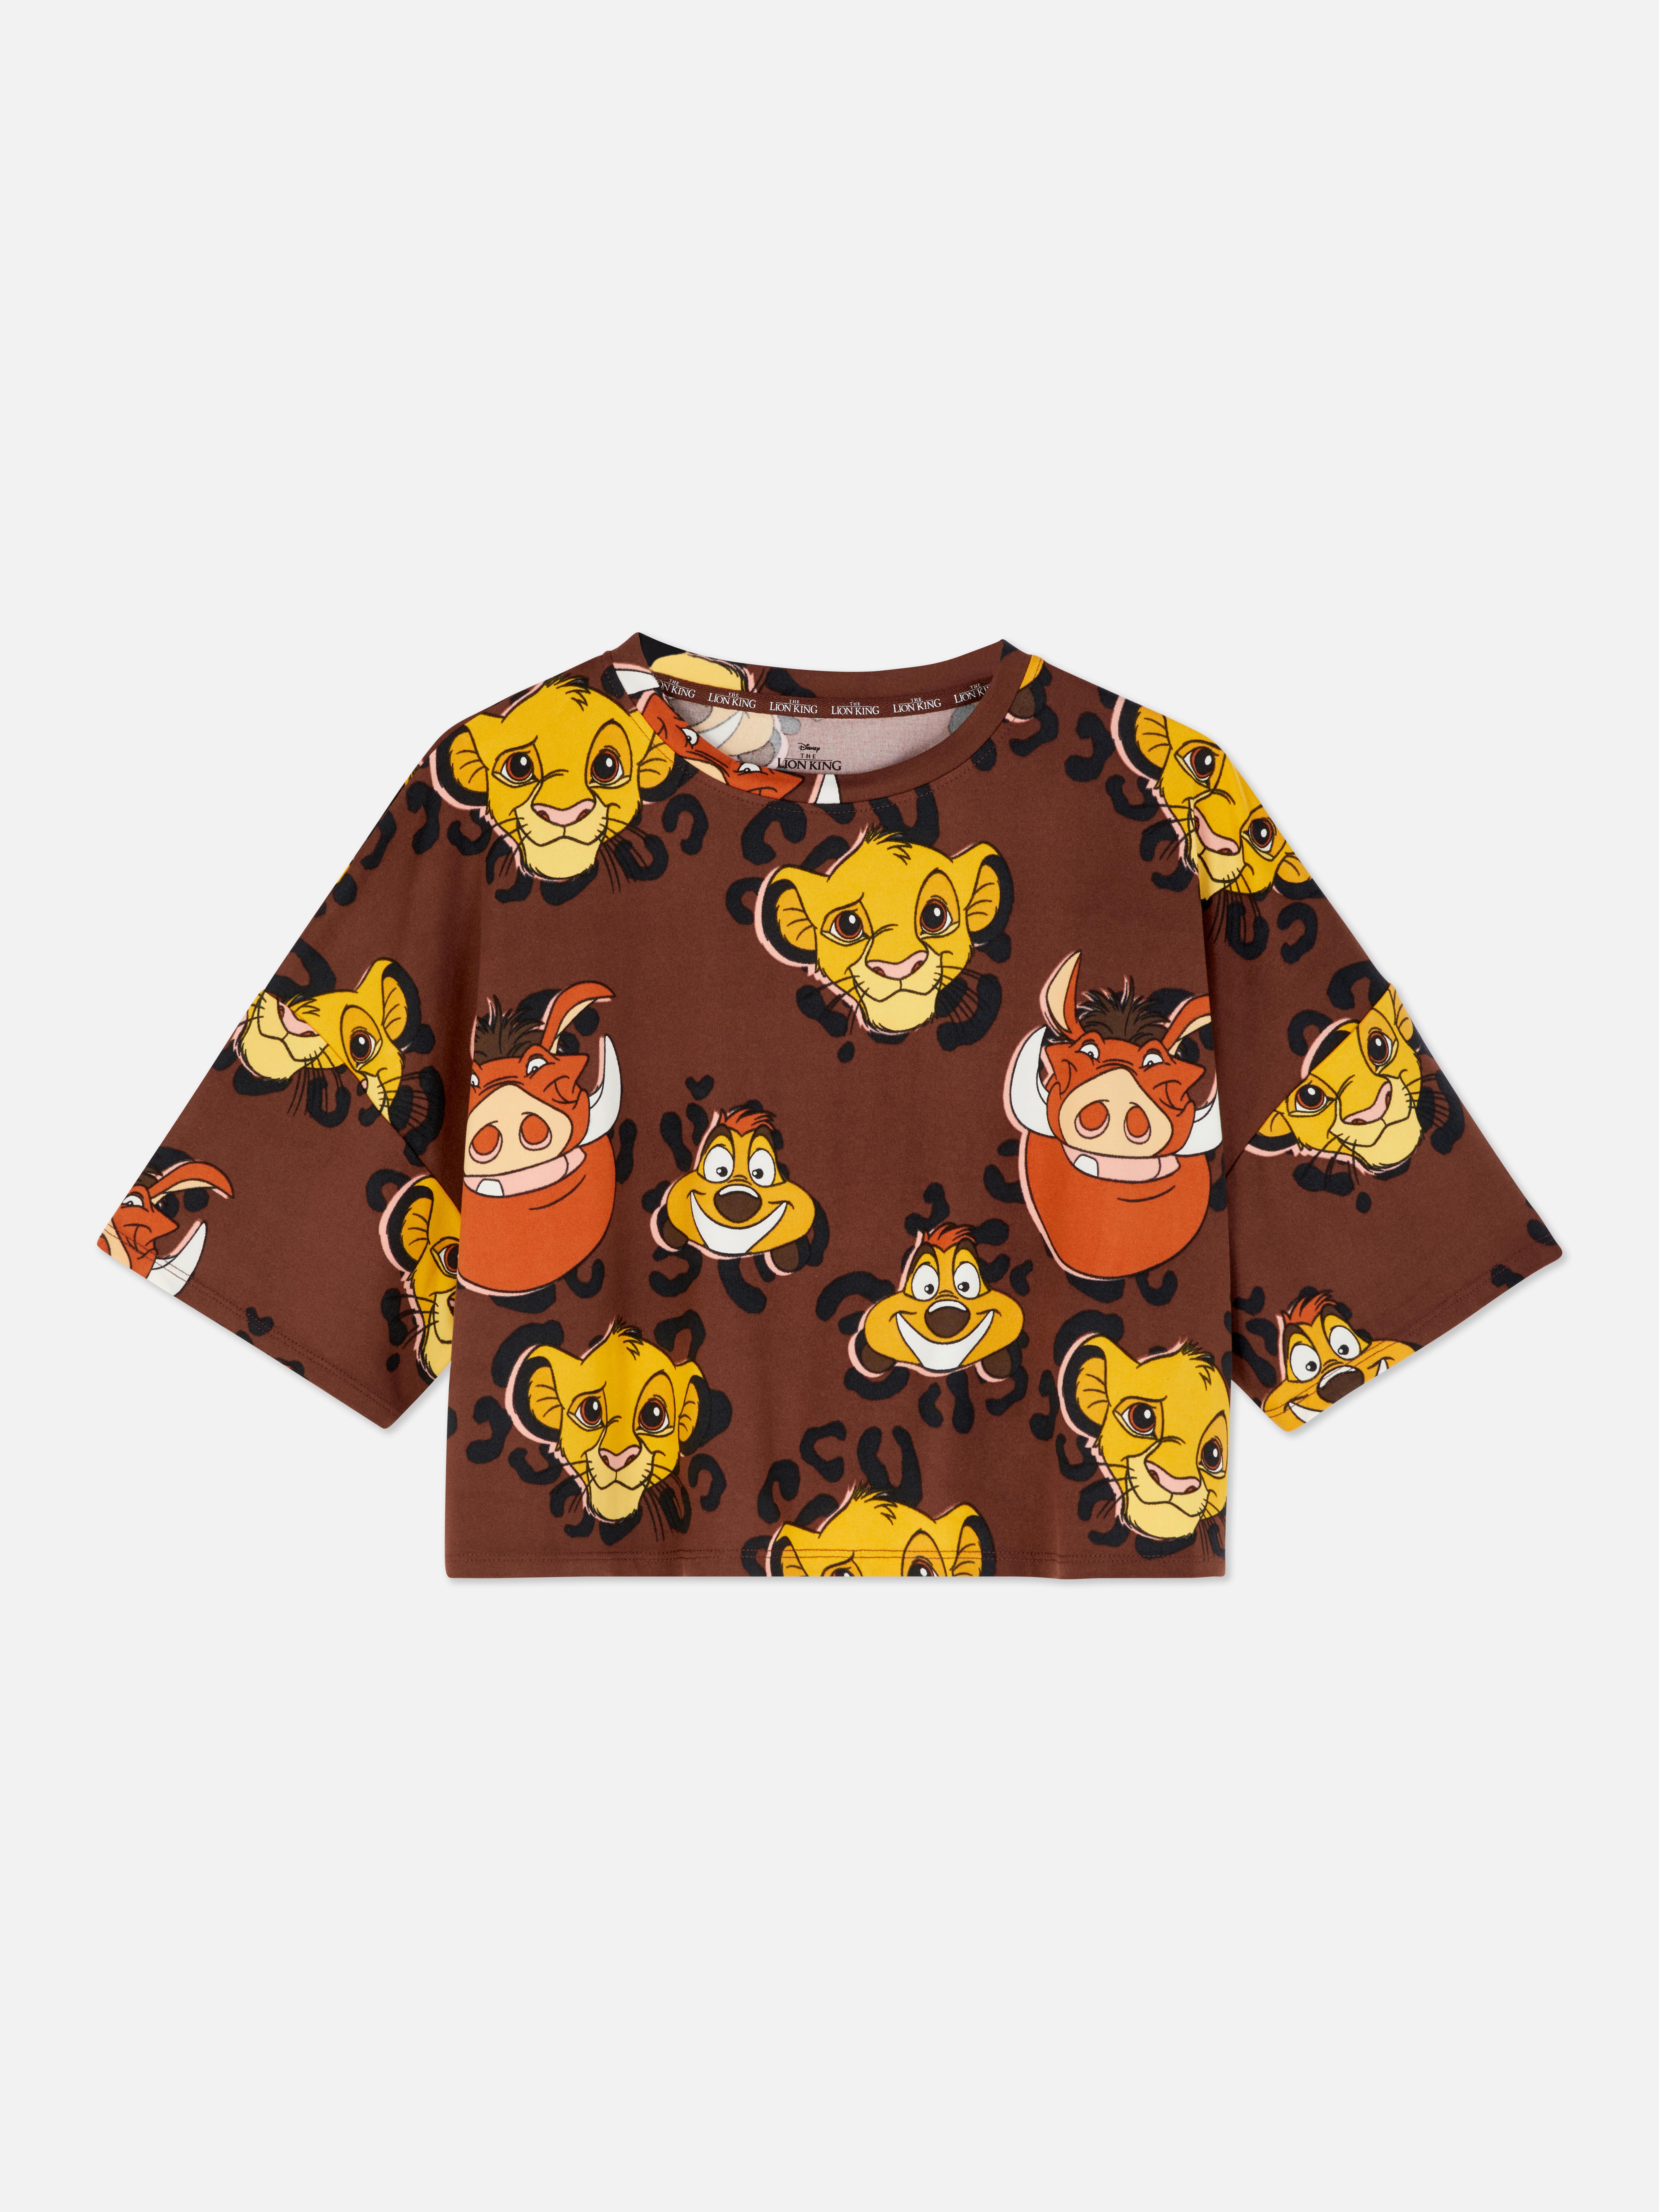 Disney's The Lion King Cropped T-shirt